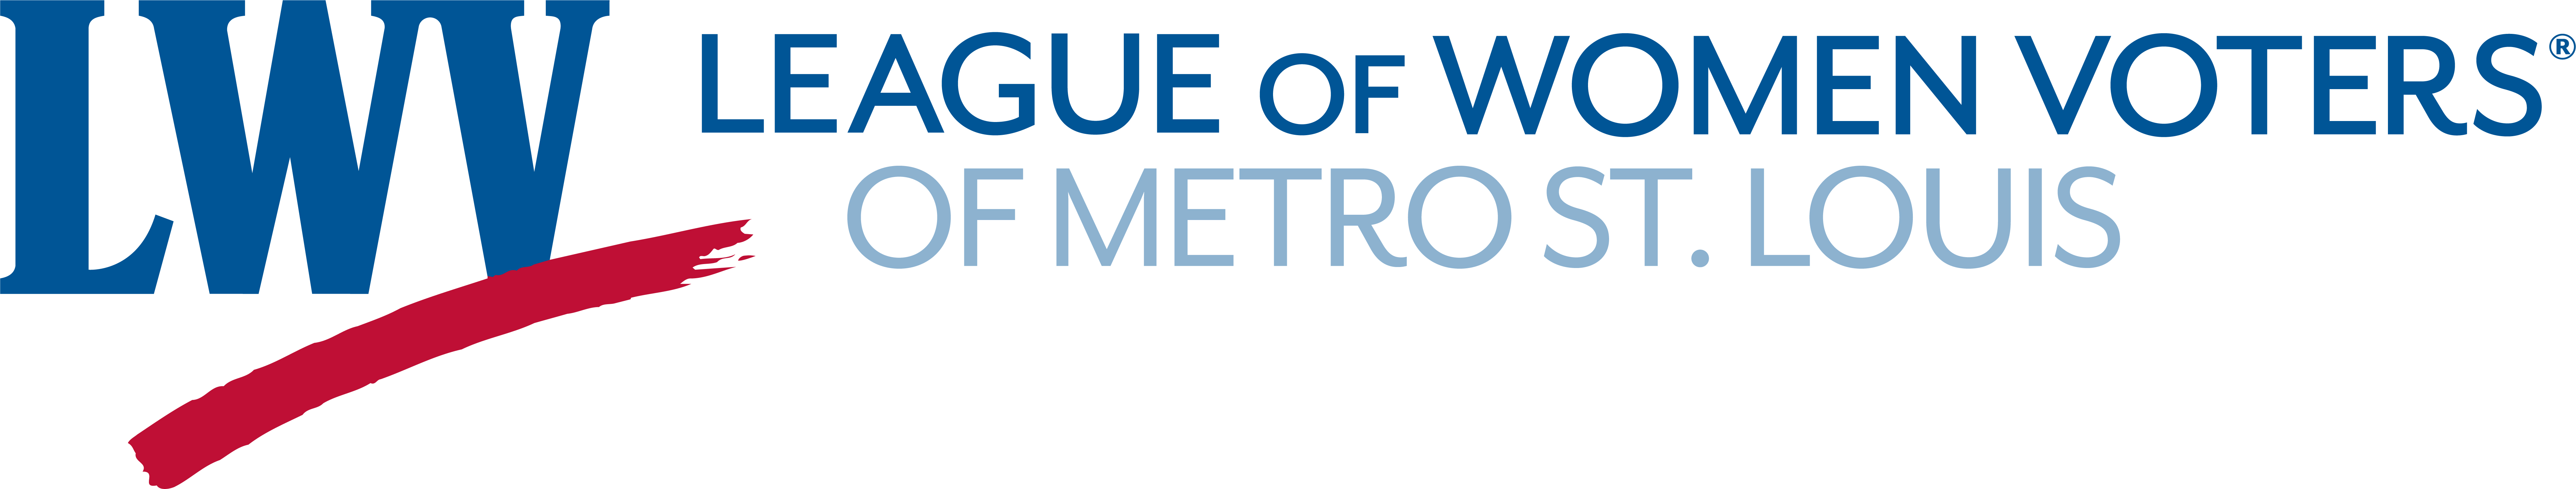 logo for the League of Women Voters of metro St Louis